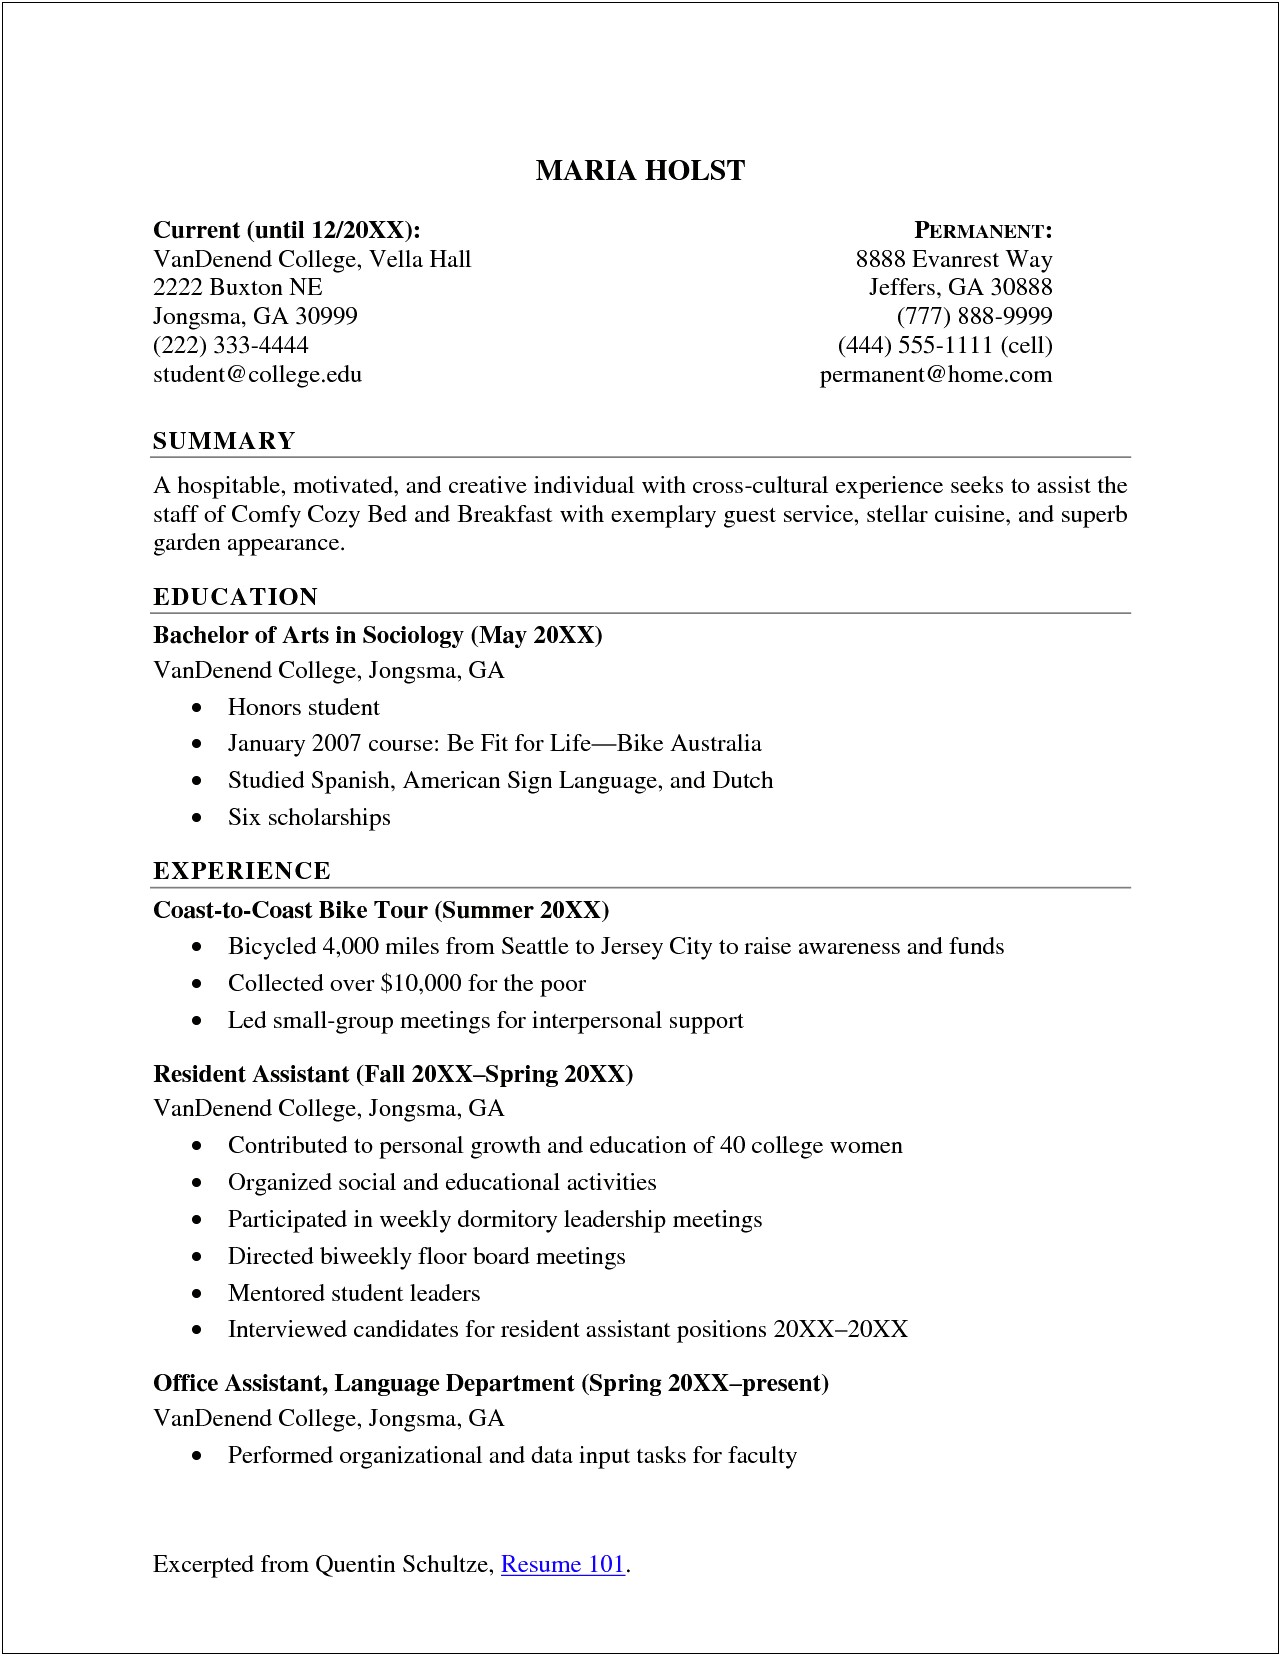 Resume For Undergraduate Student With Experience